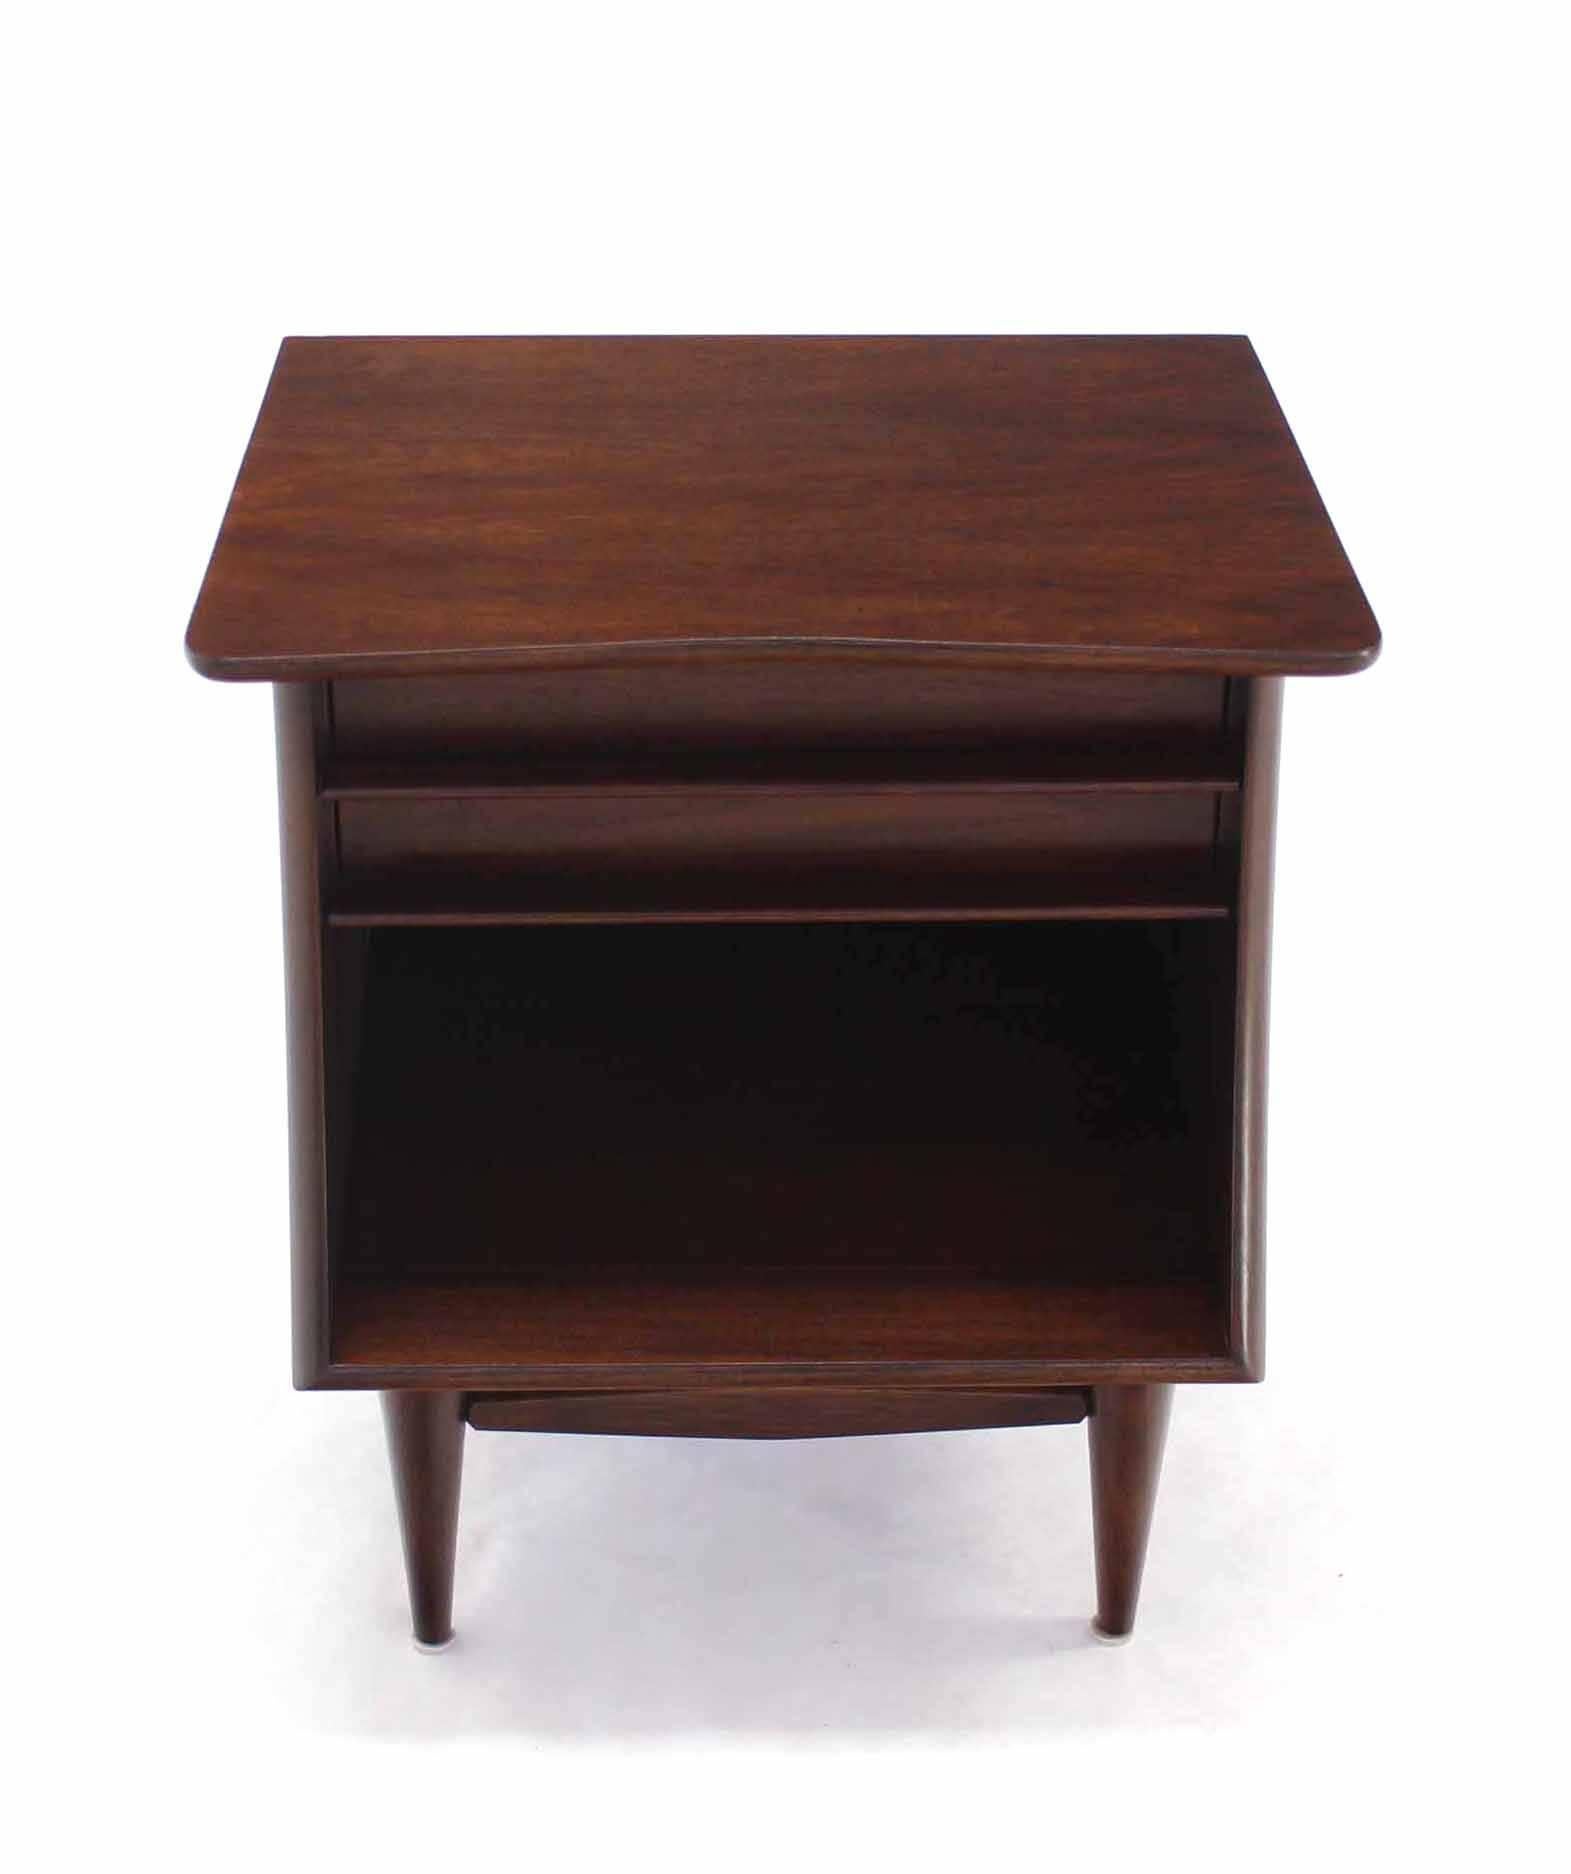 Pair of American Walnut One Drawer Nightstands In Excellent Condition For Sale In Rockaway, NJ